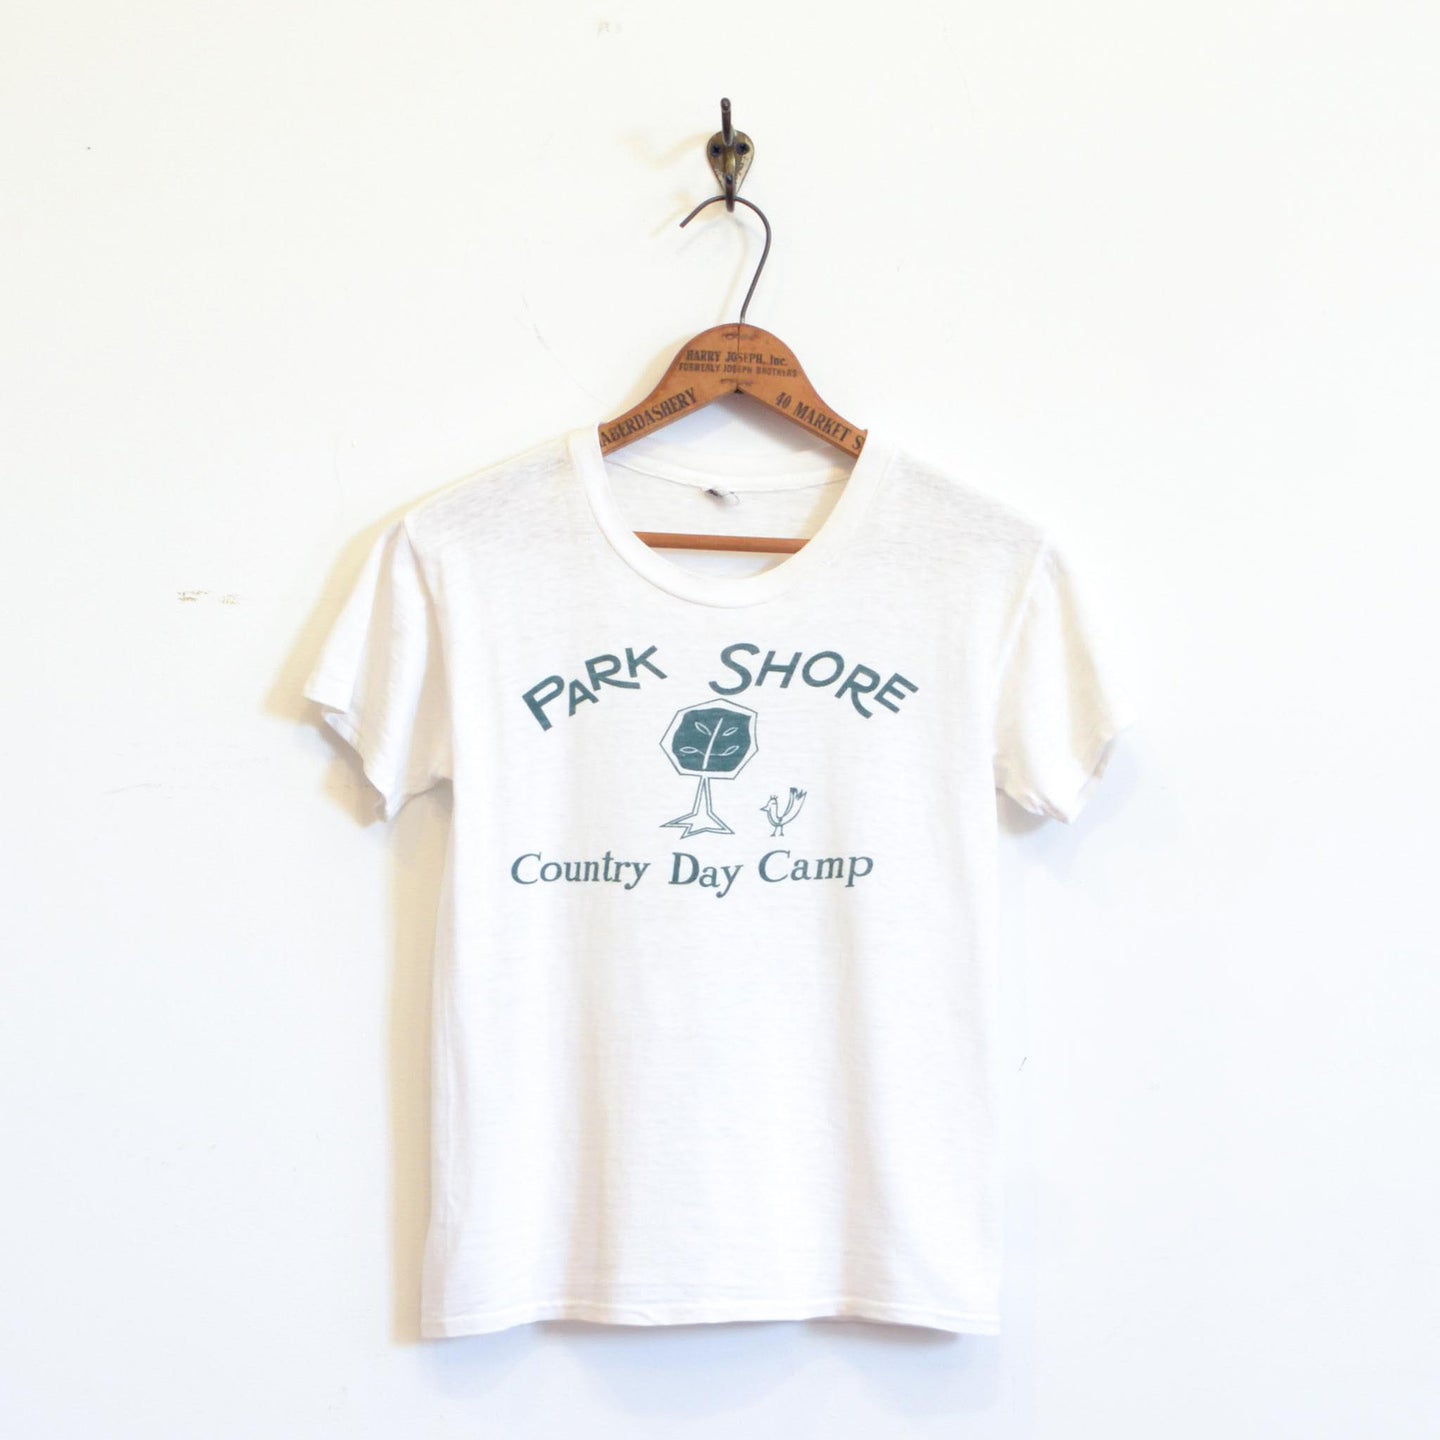 JACLEE - County Day Camp Tee Shirt